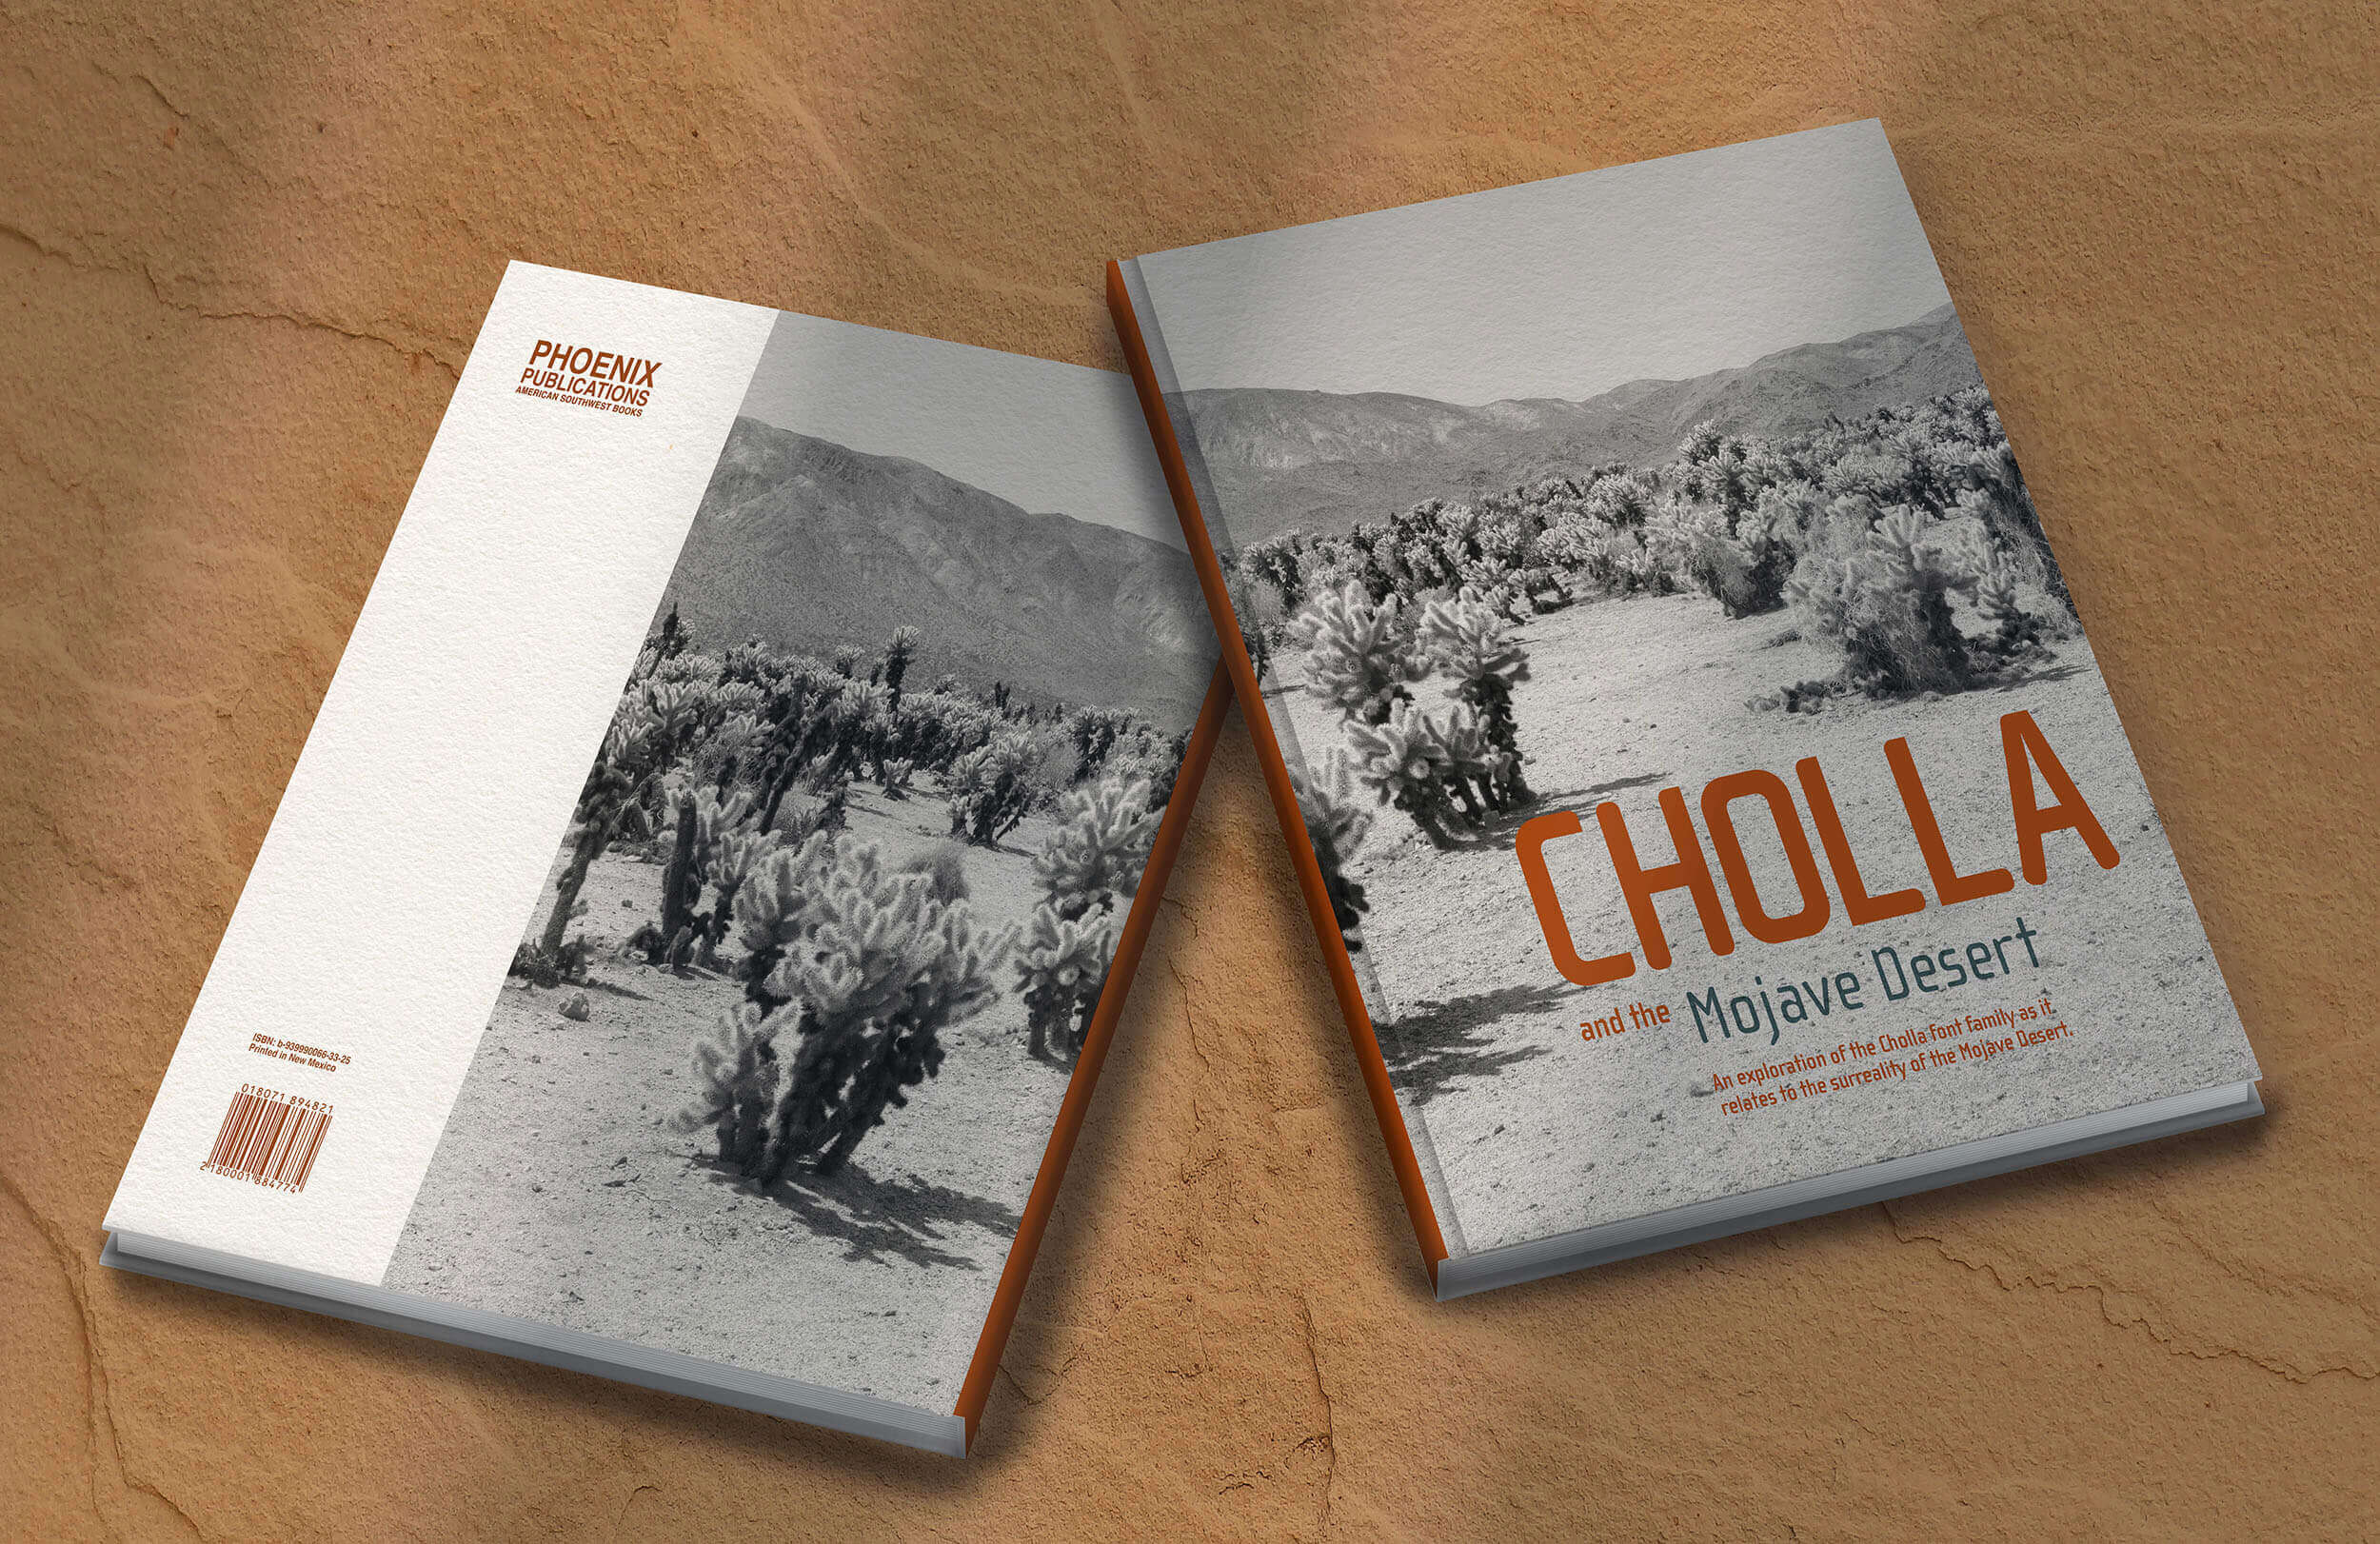 Cholla Book back and front